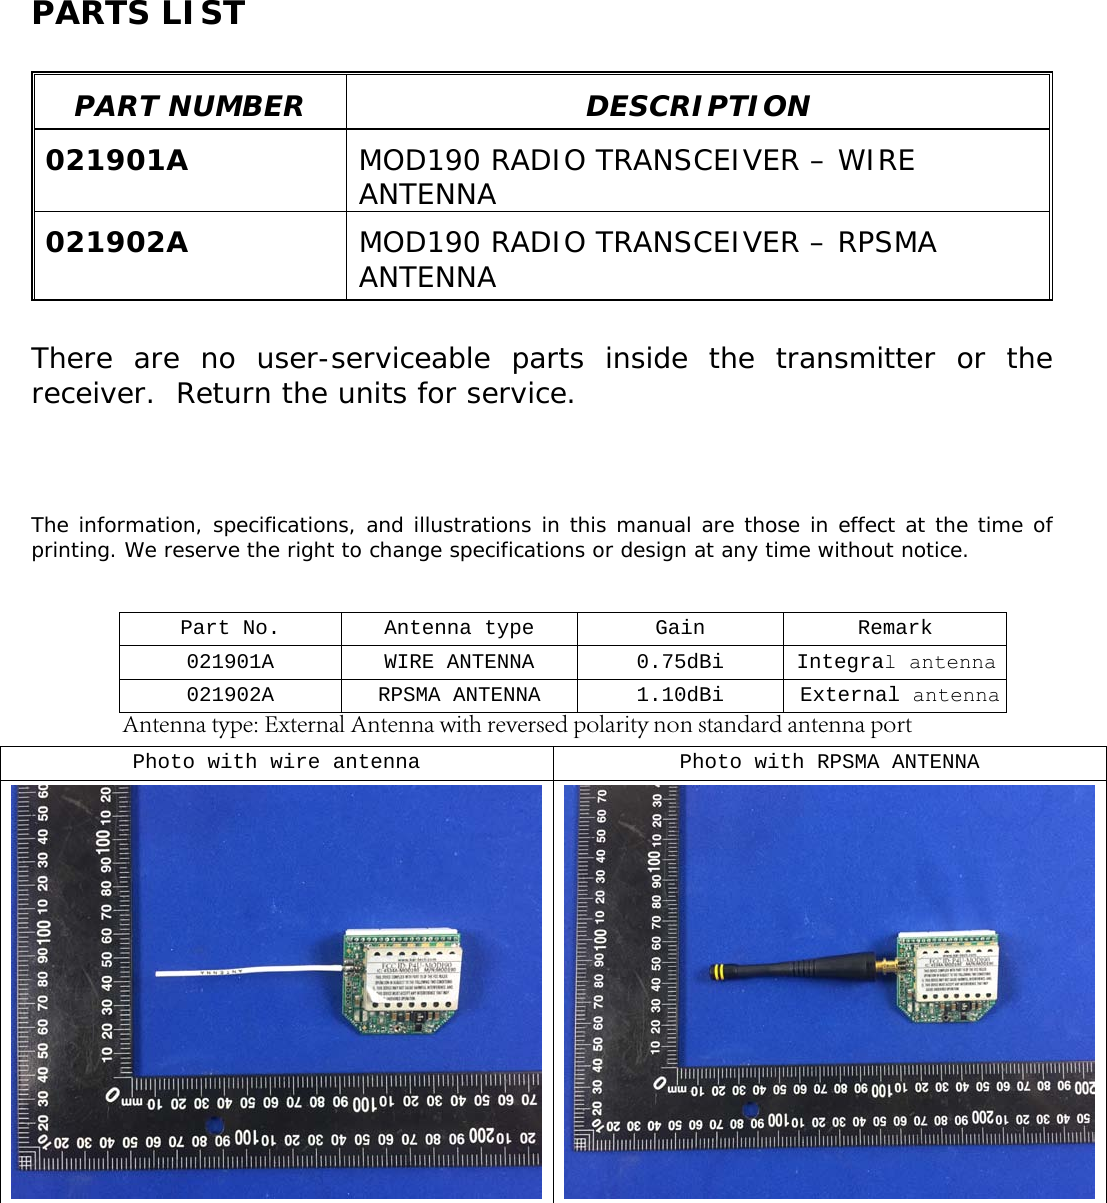 PARTS LIST PART NUMBER  DESCRIPTION 021901A  MOD190 RADIO TRANSCEIVER – WIRE ANTENNA 021902A  MOD190 RADIO TRANSCEIVER – RPSMA ANTENNA There are no user-serviceable parts inside the transmitter or the receiver.  Return the units for service. The information, specifications, and illustrations in this manual are those in effect at the time of printing. We reserve the right to change specifications or design at any time without notice. Part No.  Antenna type Gain  Remark 021901A WIRE ANTENNA 0.75dBi Integral antenna 021902A RPSMA ANTENNA 1.10dBi External antennaPhoto with wire antenna Photo with RPSMA ANTENNA Antenna type: External Antenna with reversed polarity non standard antenna port